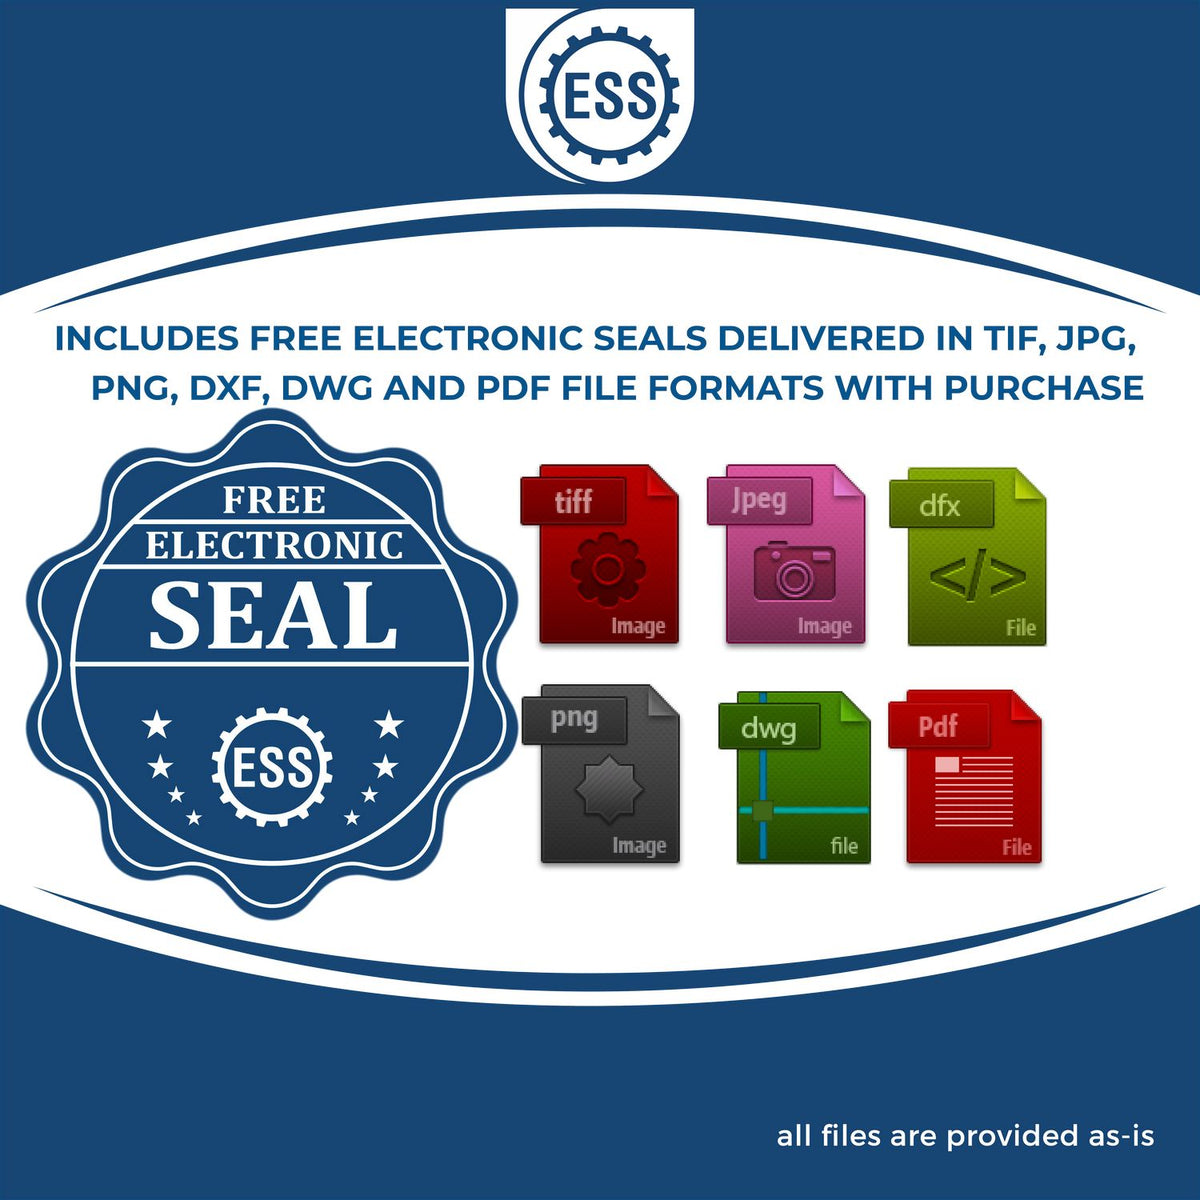 An infographic for the free electronic seal for the Self-Inking Arizona PE Stamp illustrating the different file type icons such as DXF, DWG, TIF, JPG and PNG.